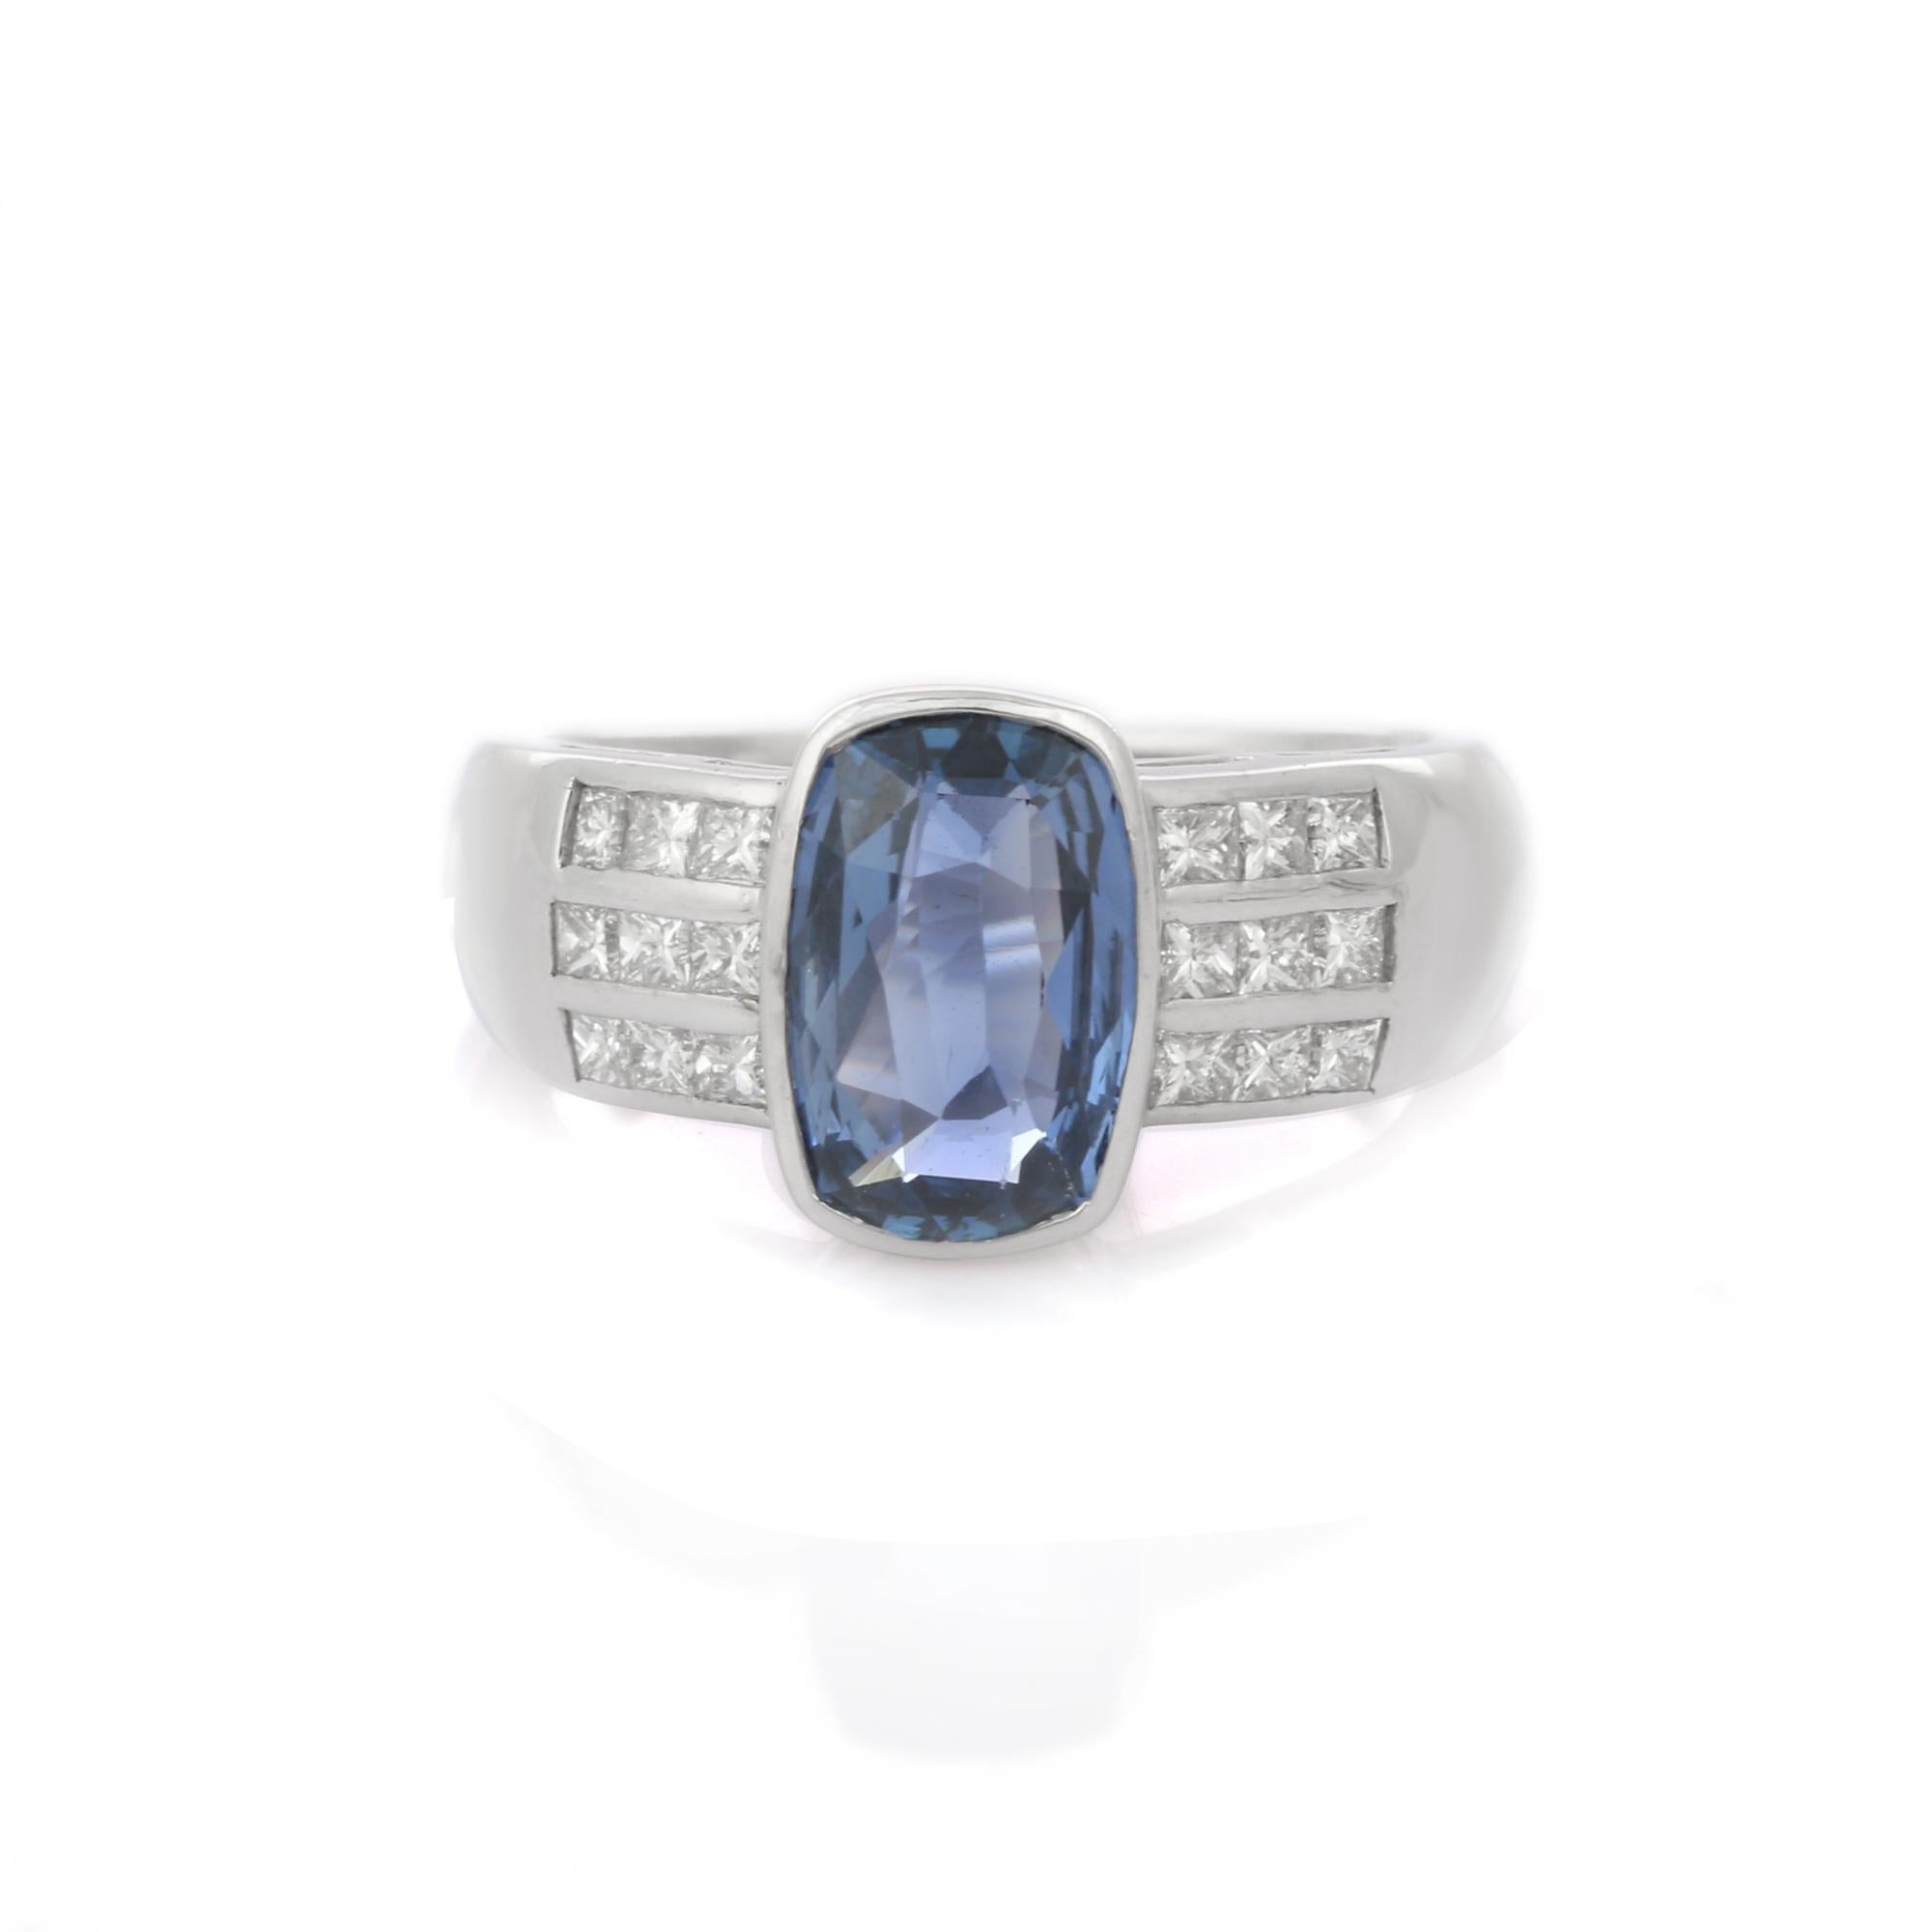 For Sale:  18K White Gold Oblong Cushion Cut Blue Sapphire and Diamond Engagement Ring 5